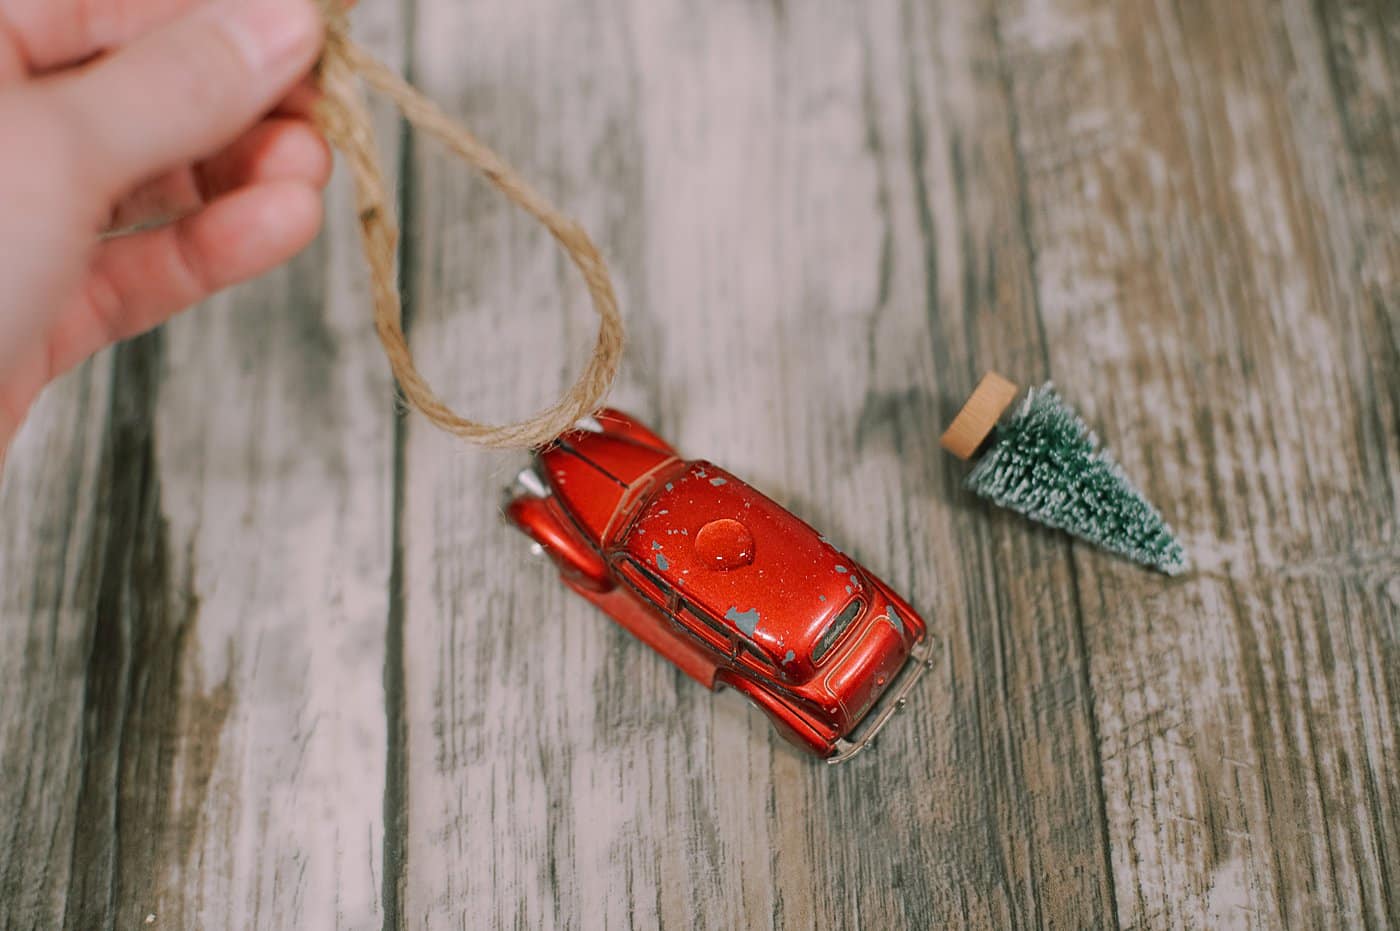 hot glue twine on to the top of the matchbox car as a hanging string